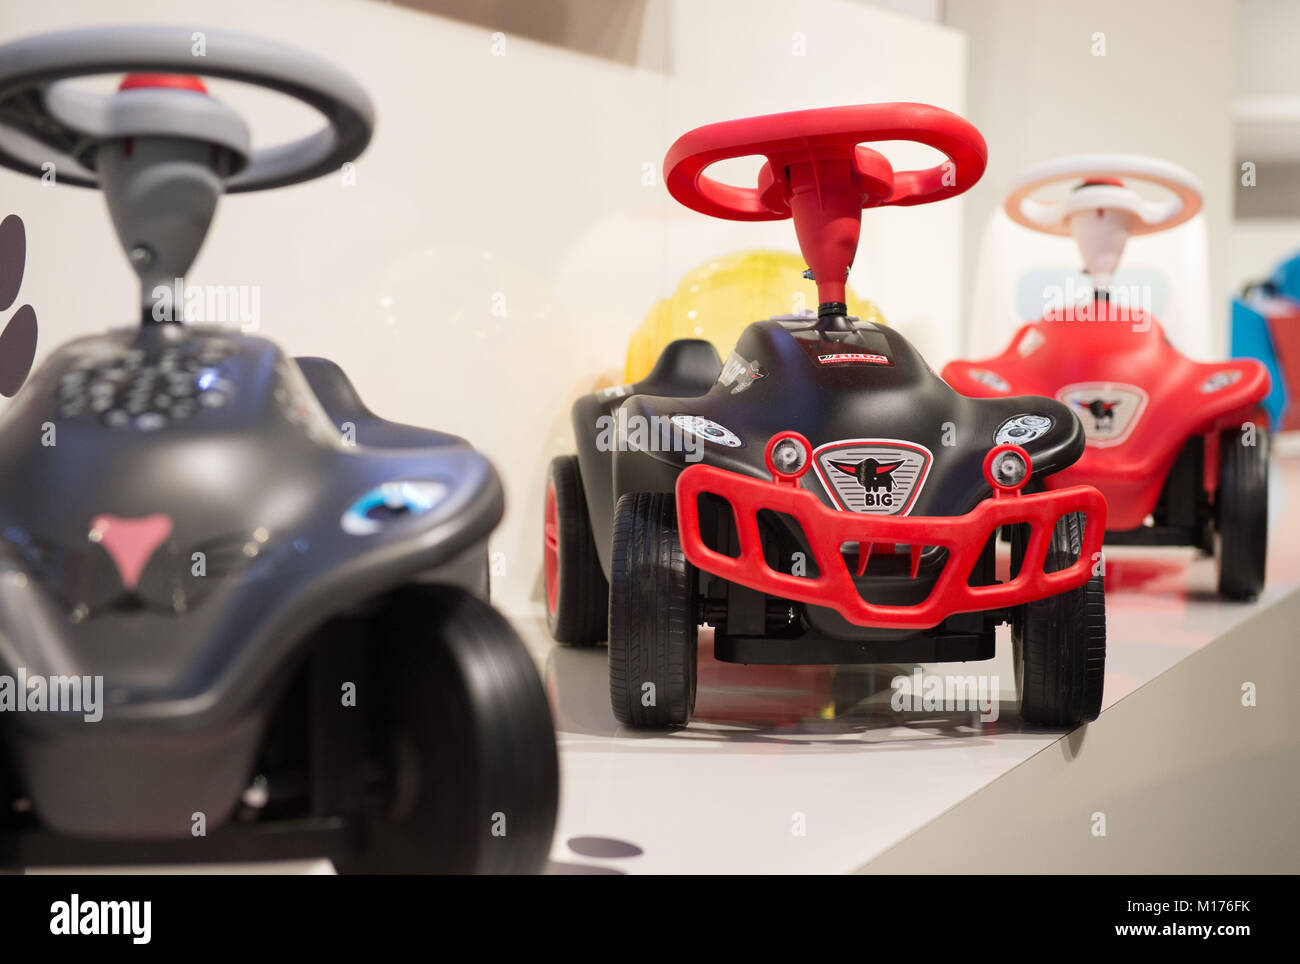 Fuerth, Germany. 26th Jan, 2018. Toy vehicles called 'Bobby-Car' by Simba Dickie are exhibited during the annual press meeting of the toy manufacturers Simba Dickie and Maerklin regarding the Nuremberg International Toy Fair, in Fuerth, Germany, 26 January 2018. Credit: Timm Schamberger/dpa/Alamy Live News Stock Photo